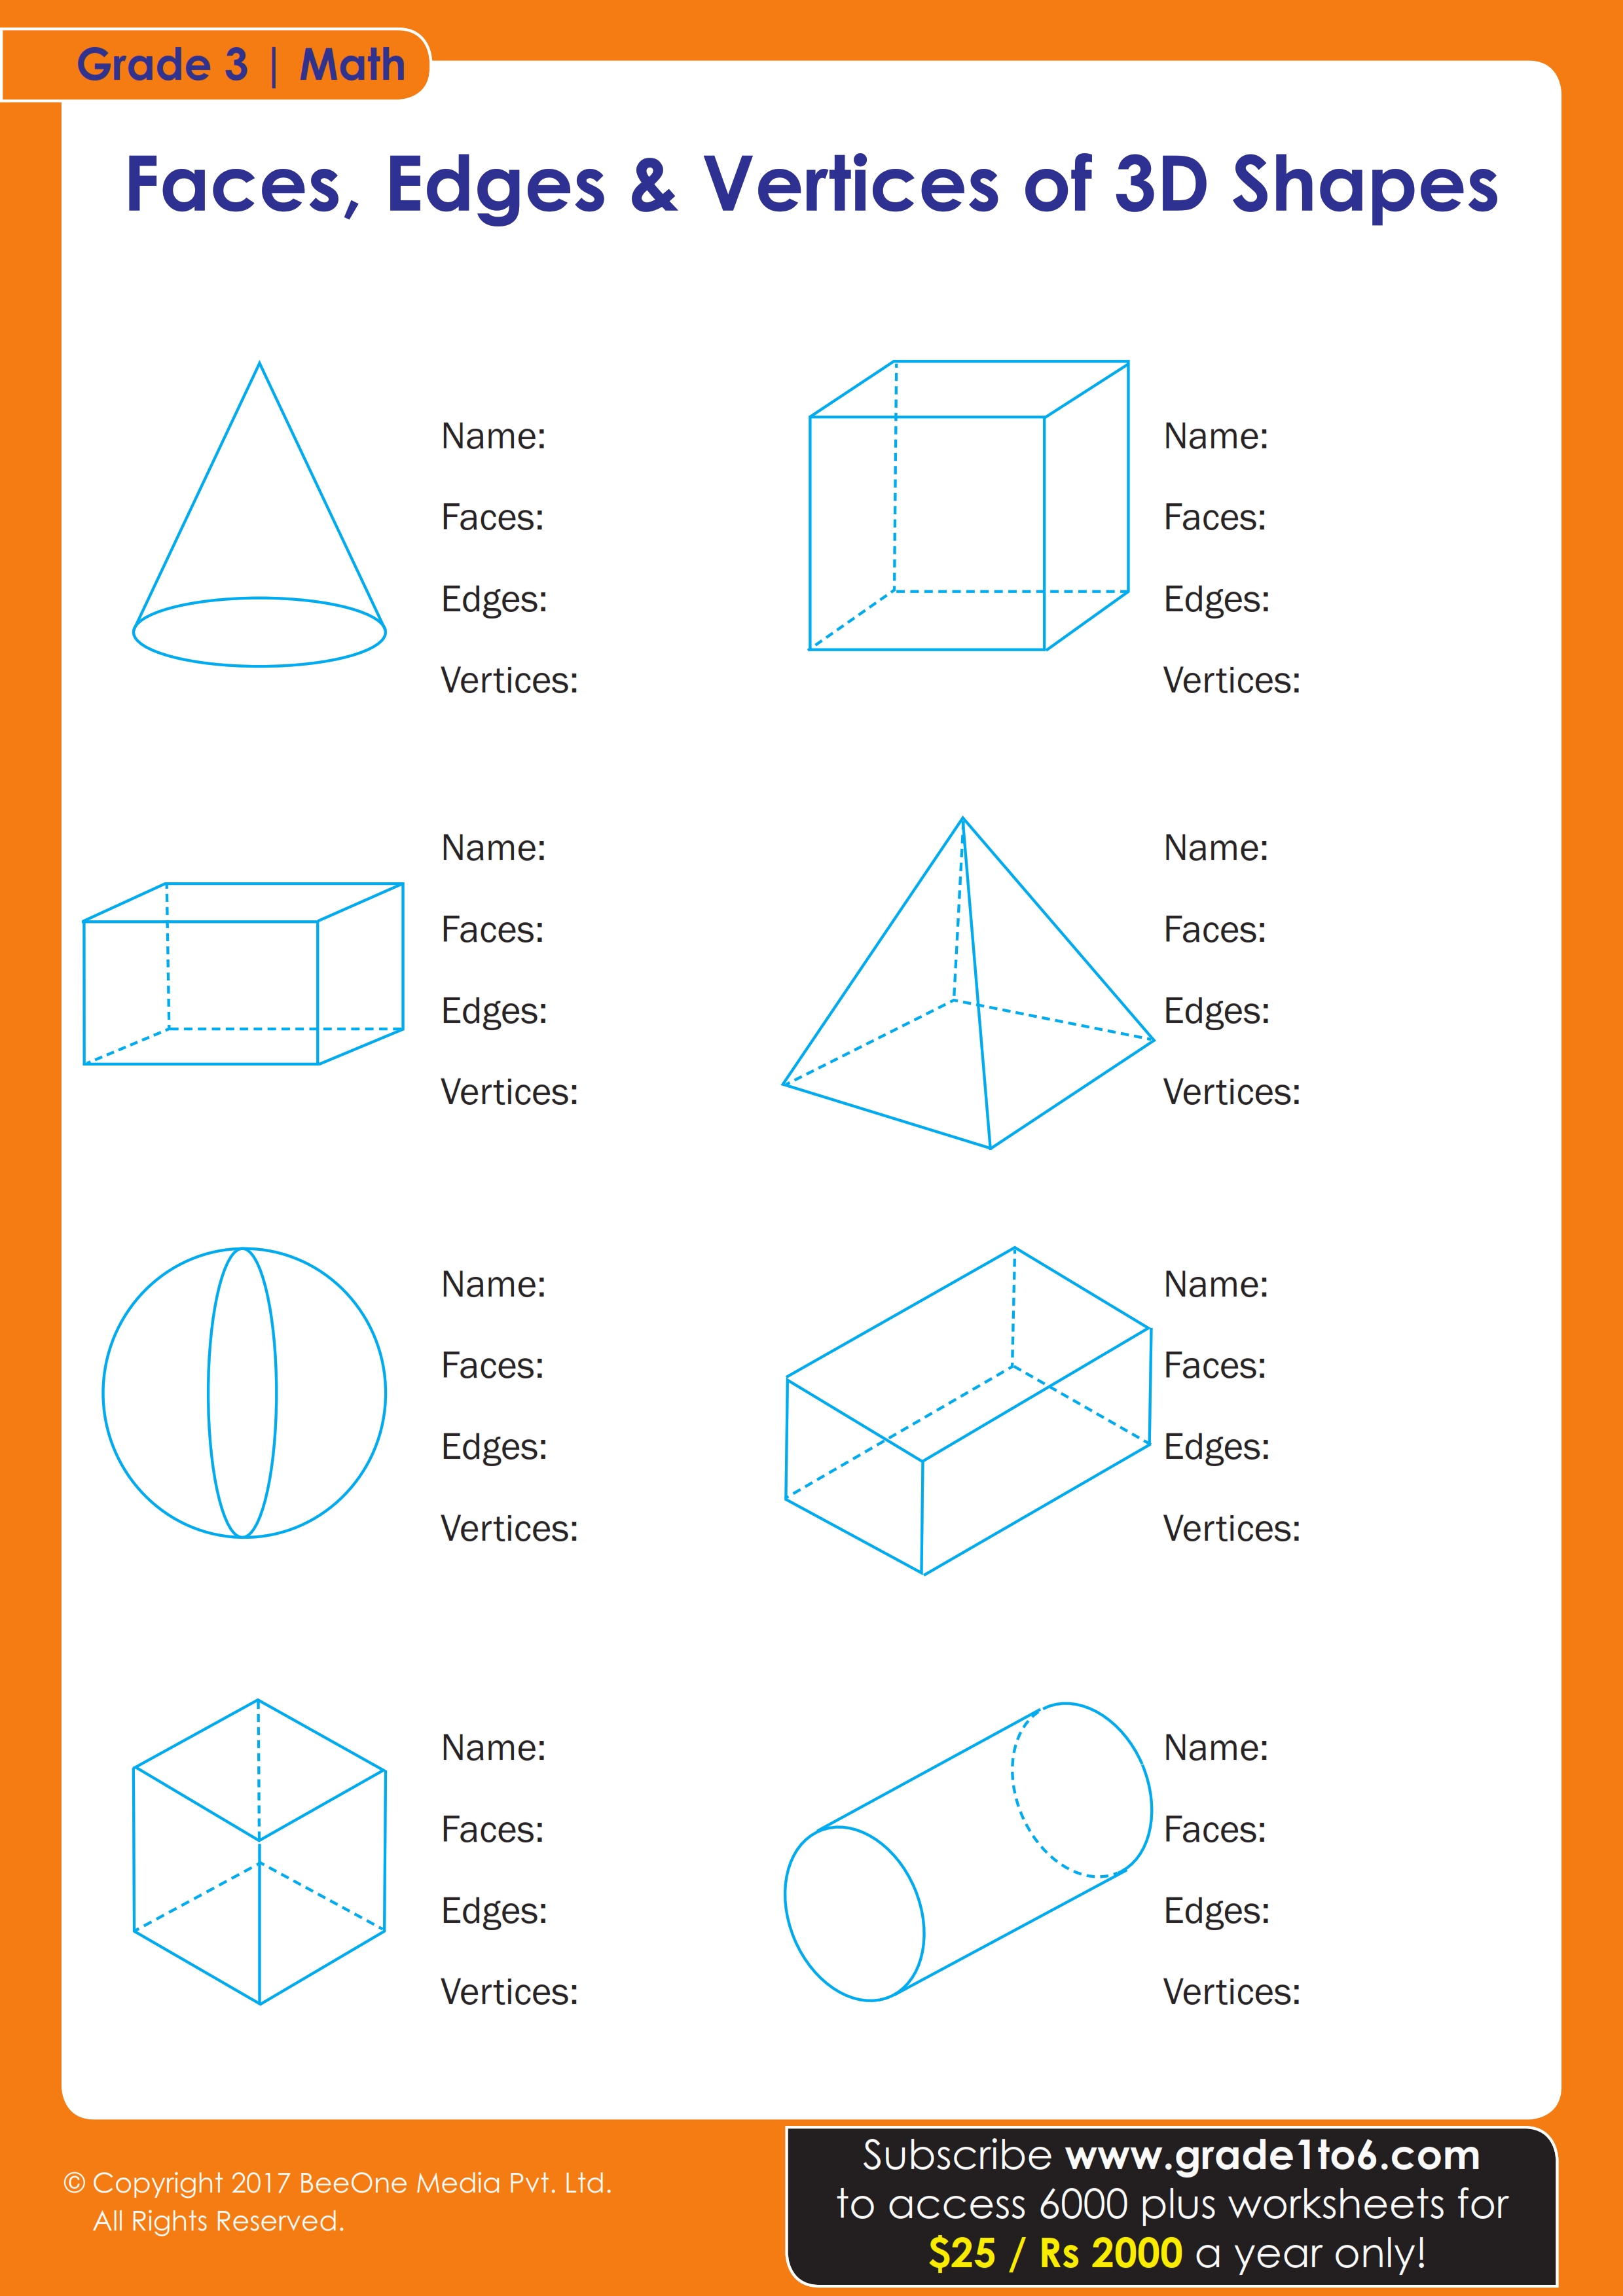 faces-edges-and-vertices-of-3d-shapes-worksheet